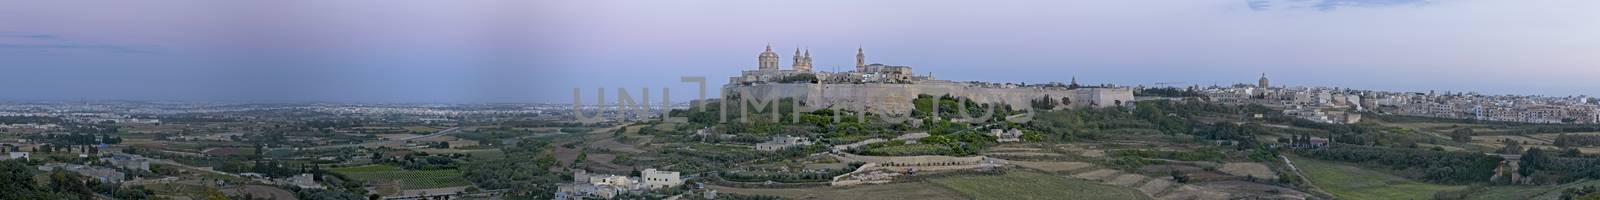 Panoramic view of the medieval city of Mdina and its surrounding countryside in Malta